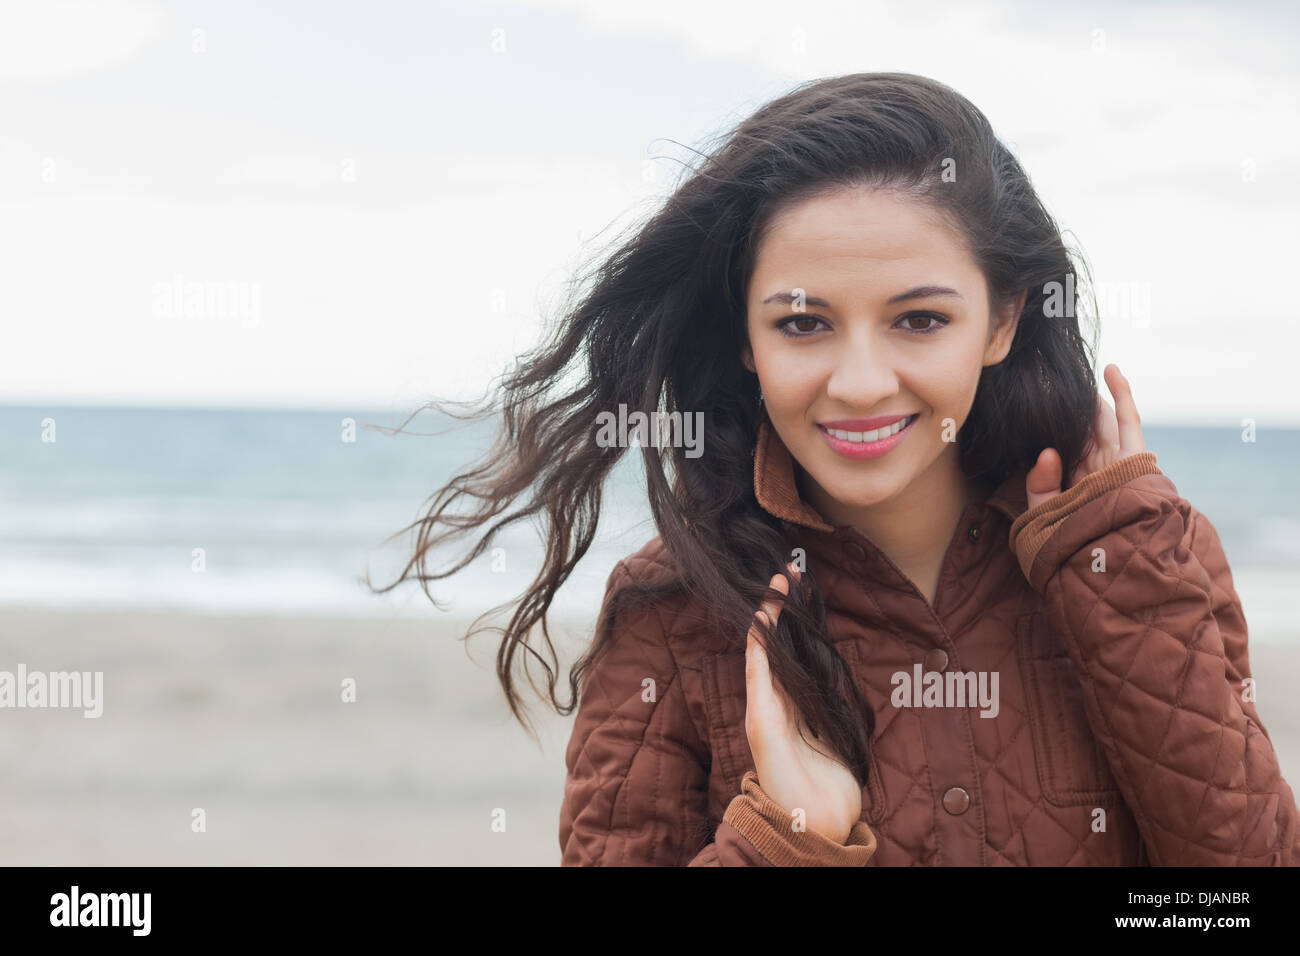 Cute smiling woman in stylish brown jacket on beach Stock Photo